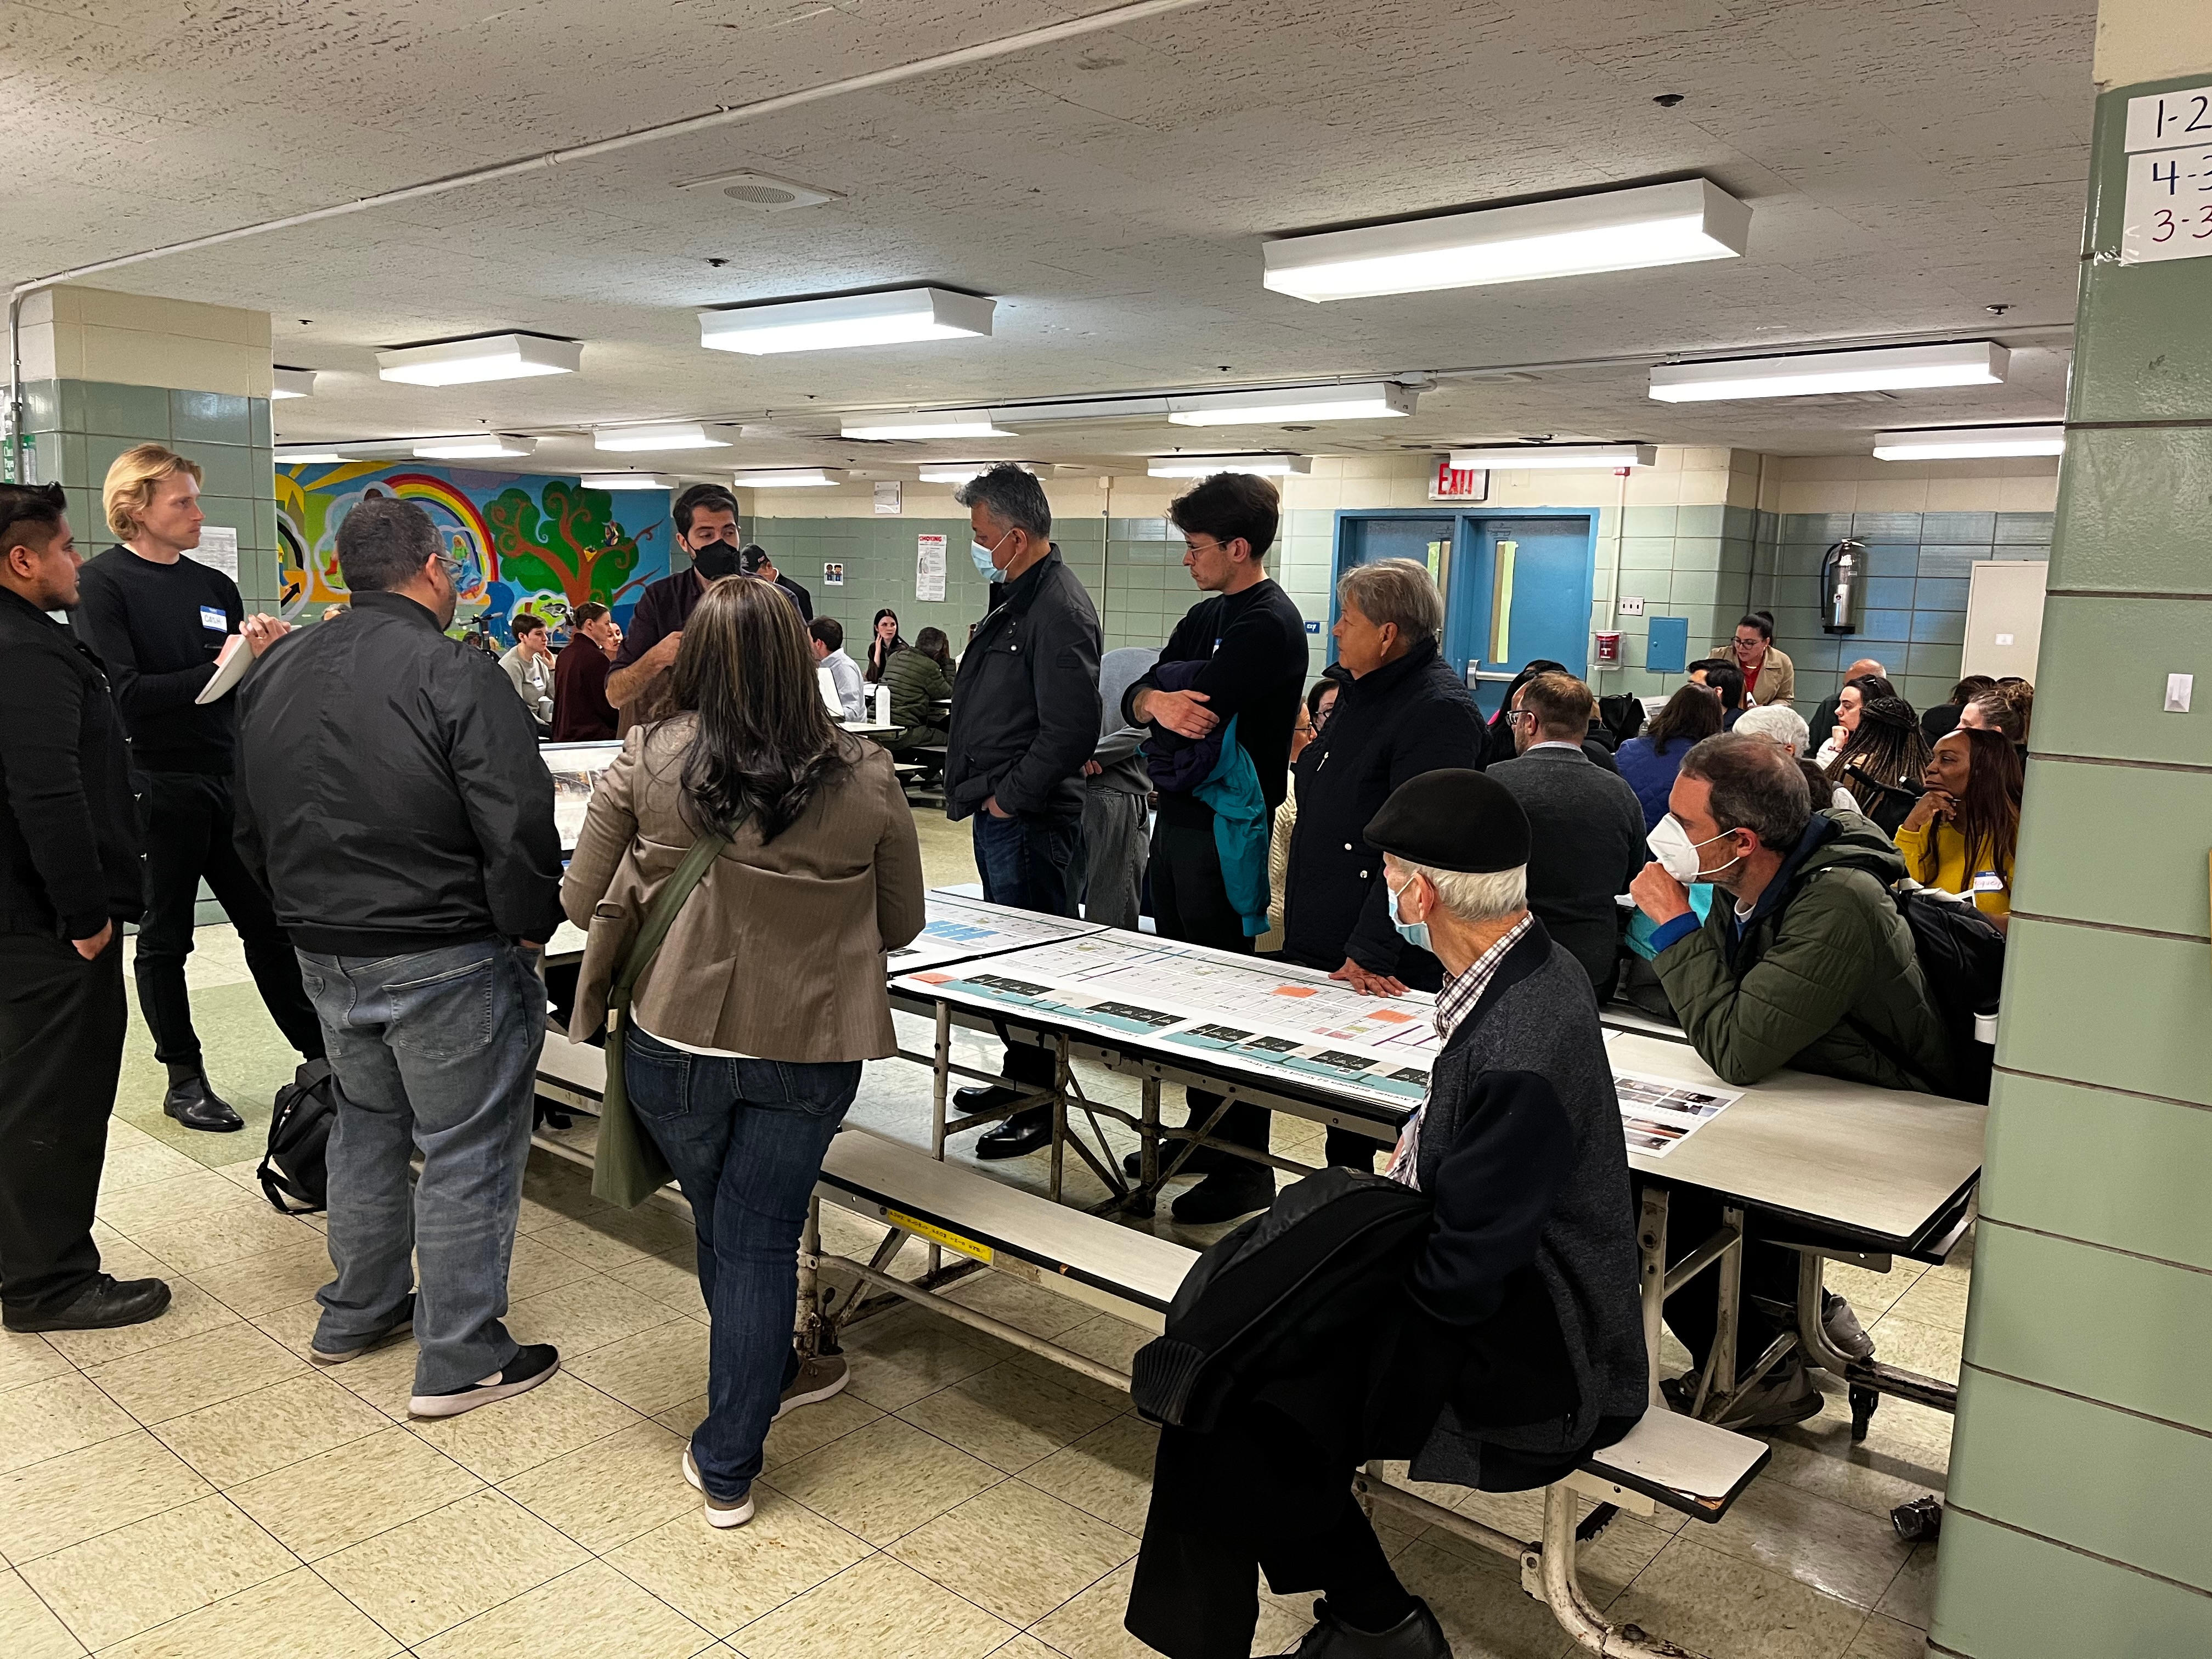 Community members gathered in school cafeteria around tables to discuss 3rd Avenue, Prospect Ave to 62nd St